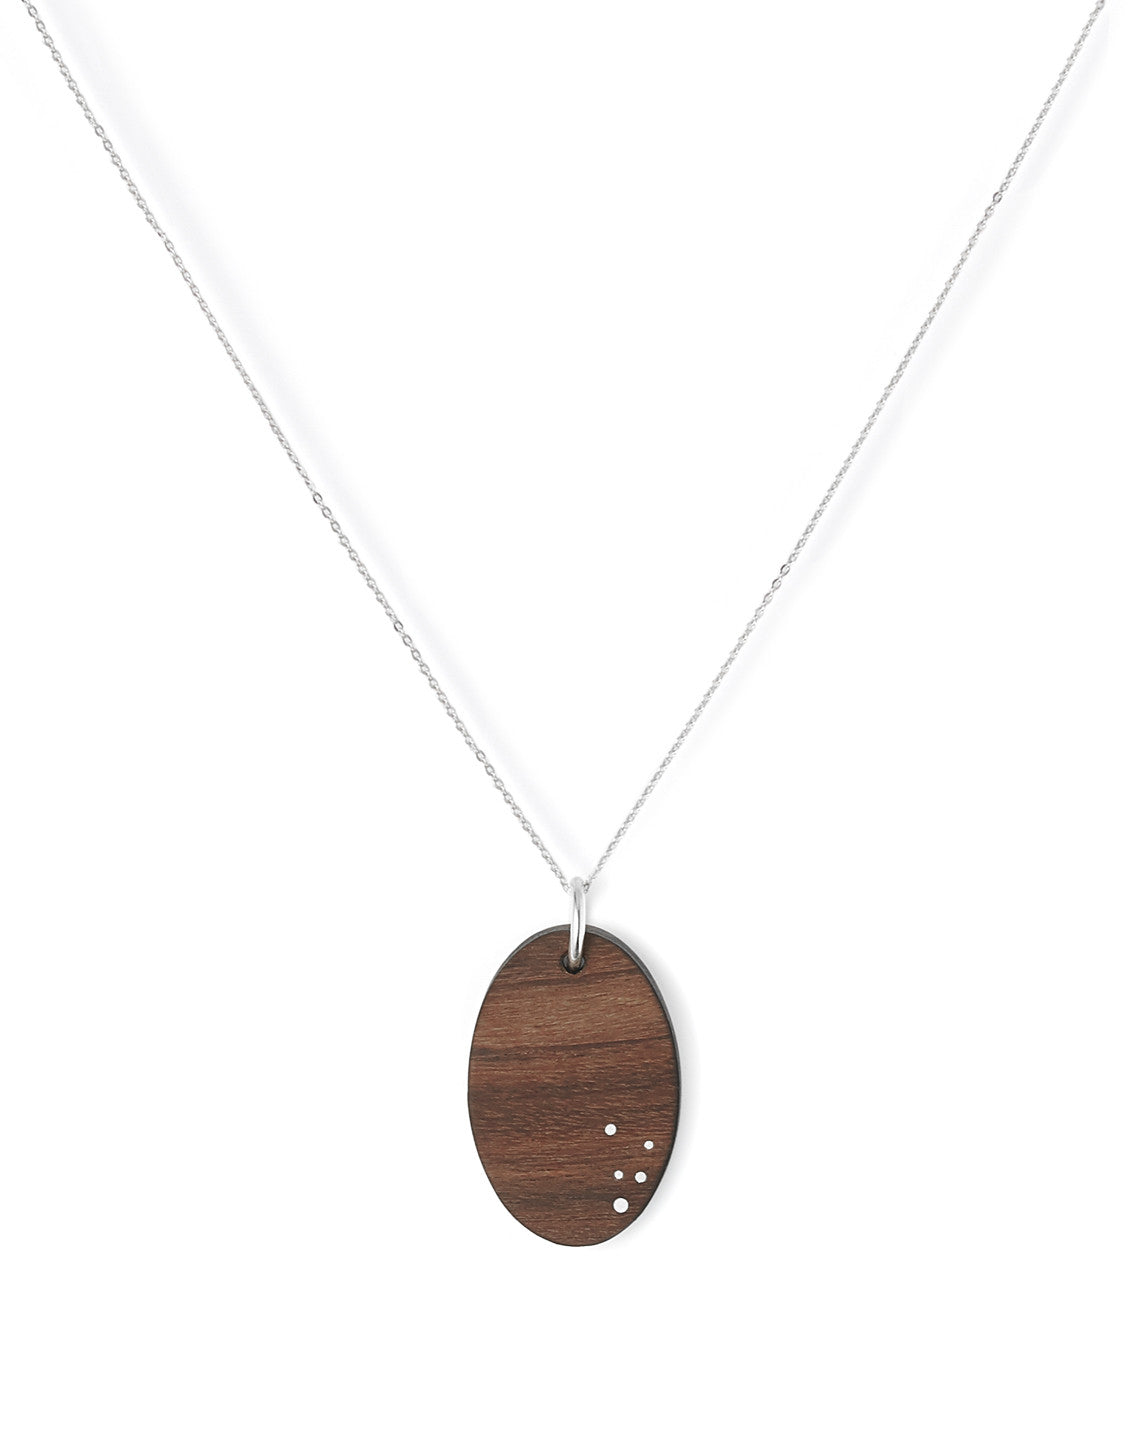 Wood Necklace - 5 Year Anniversary Gift for Wife - Wood Jewelry - Liel and Lentz